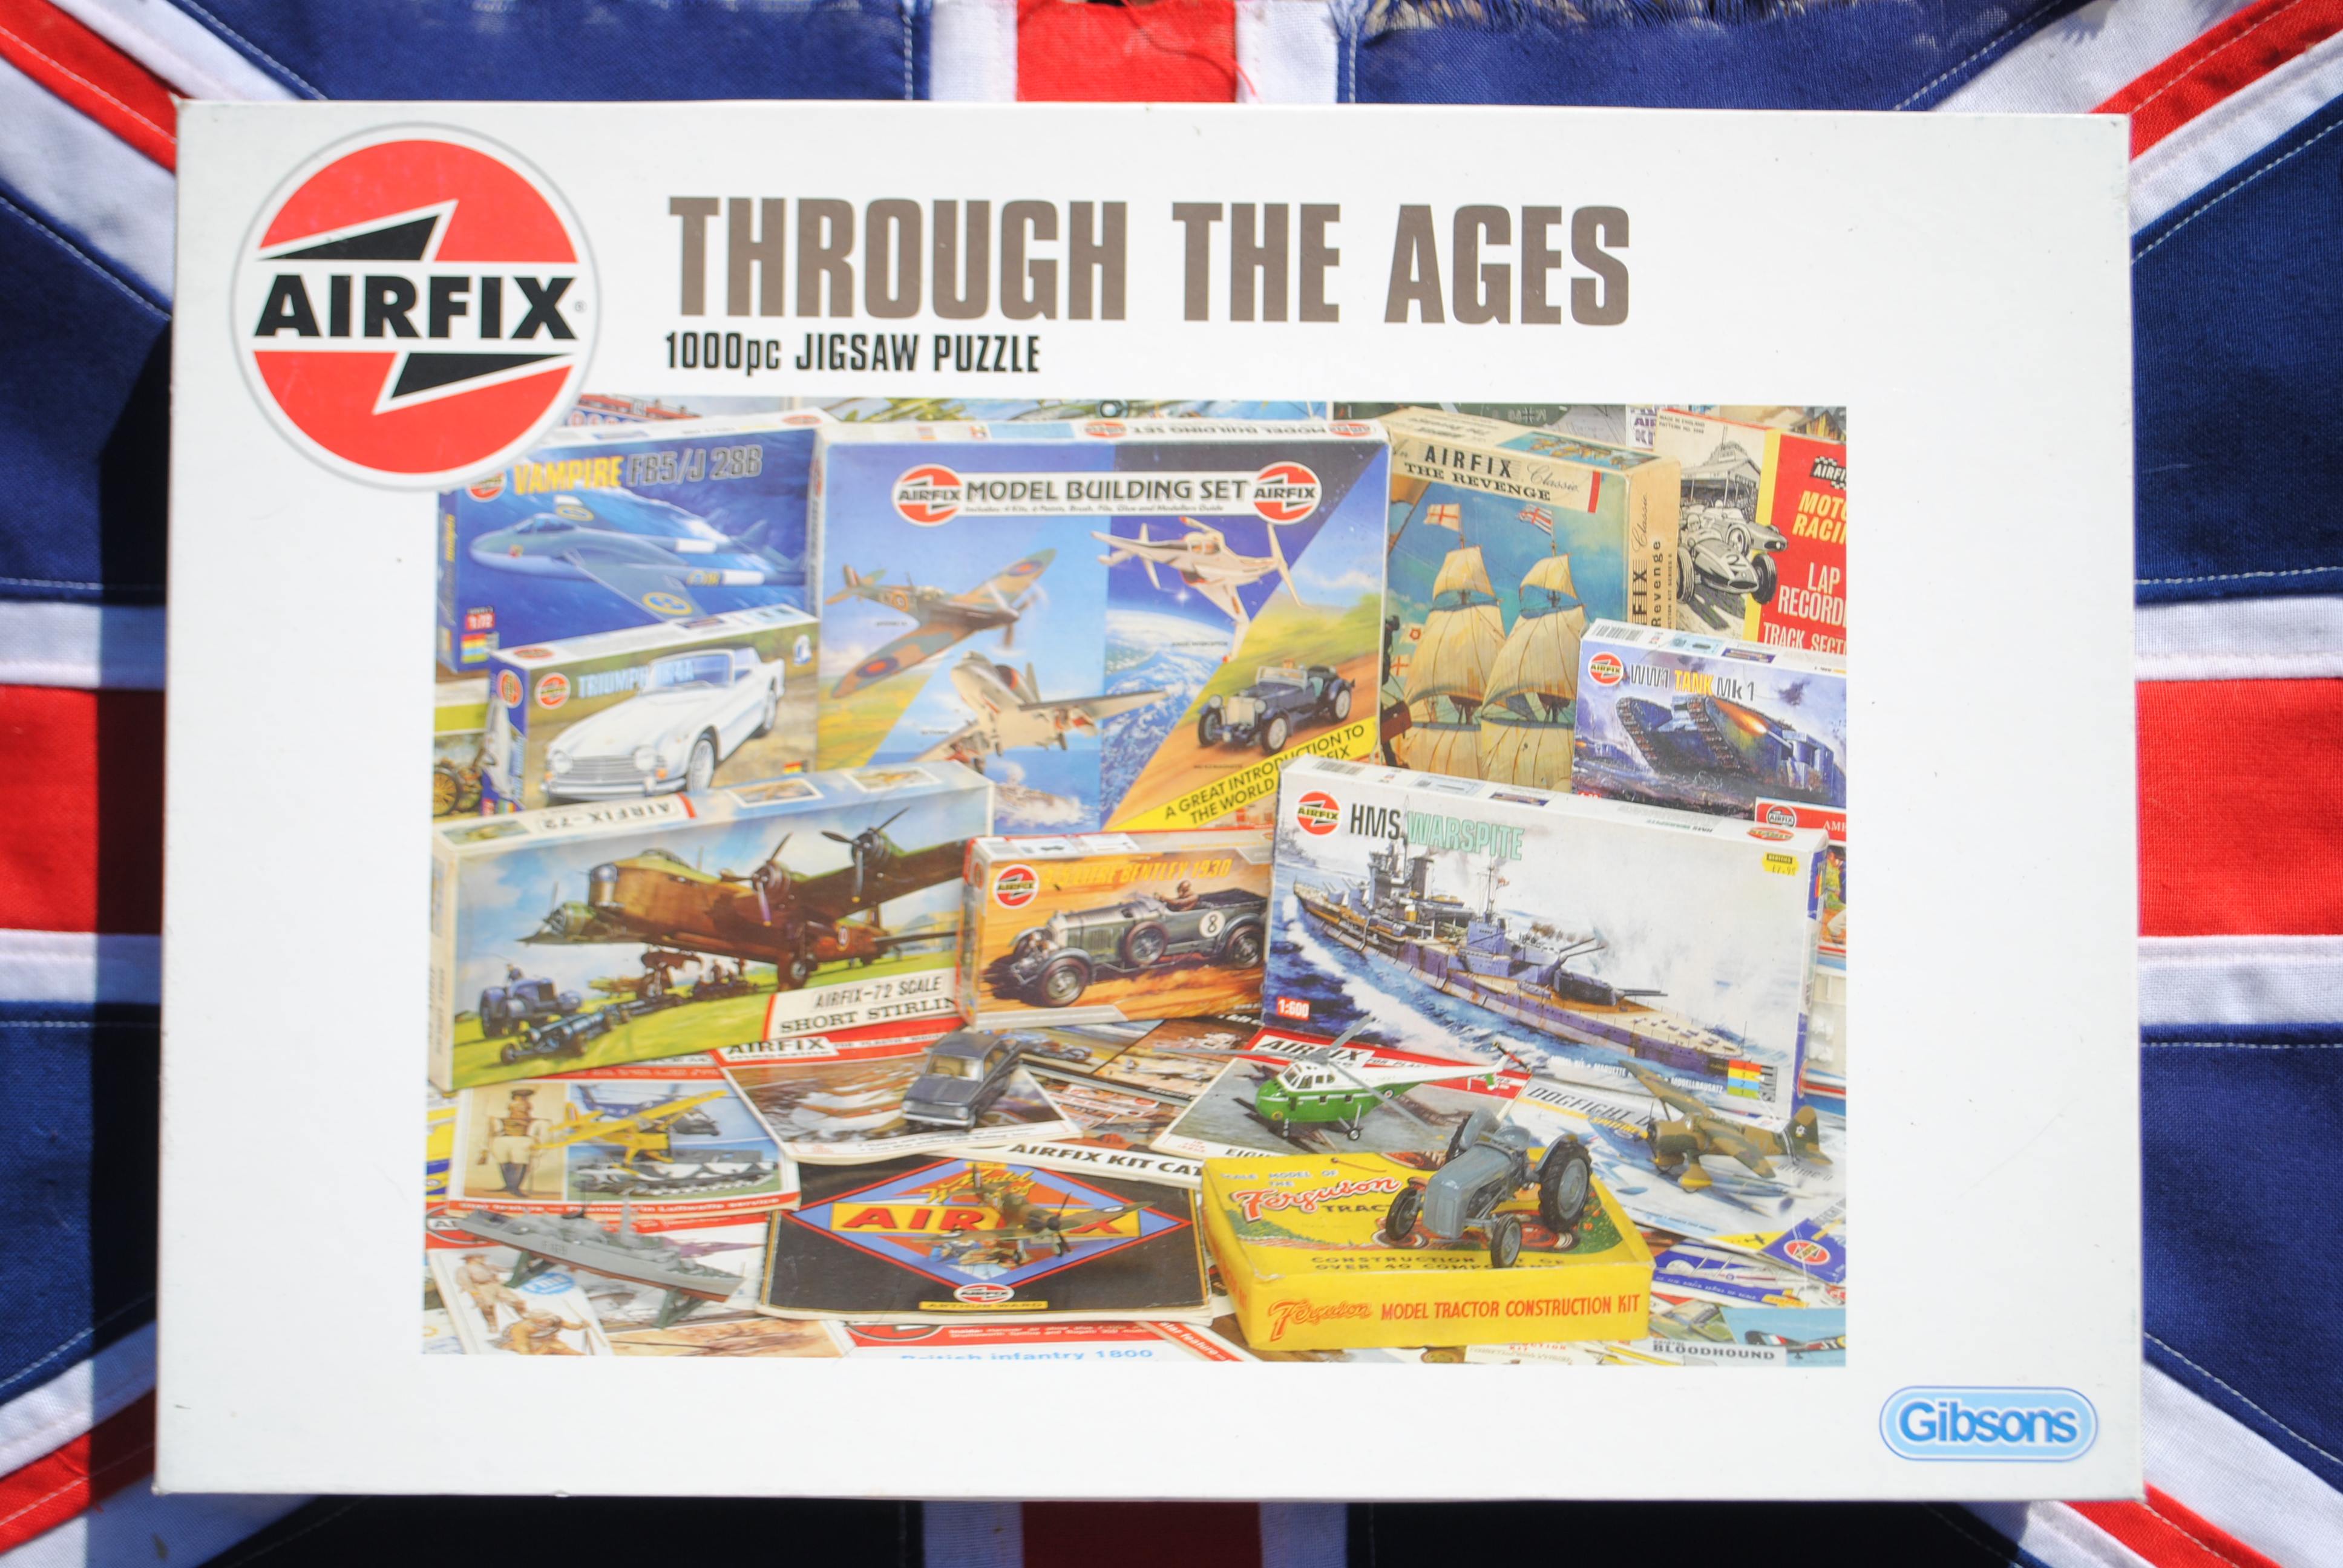 Gibsons Airfix G7017 THROUGH THE AGES '1000pc Jigsaw Puzzle'